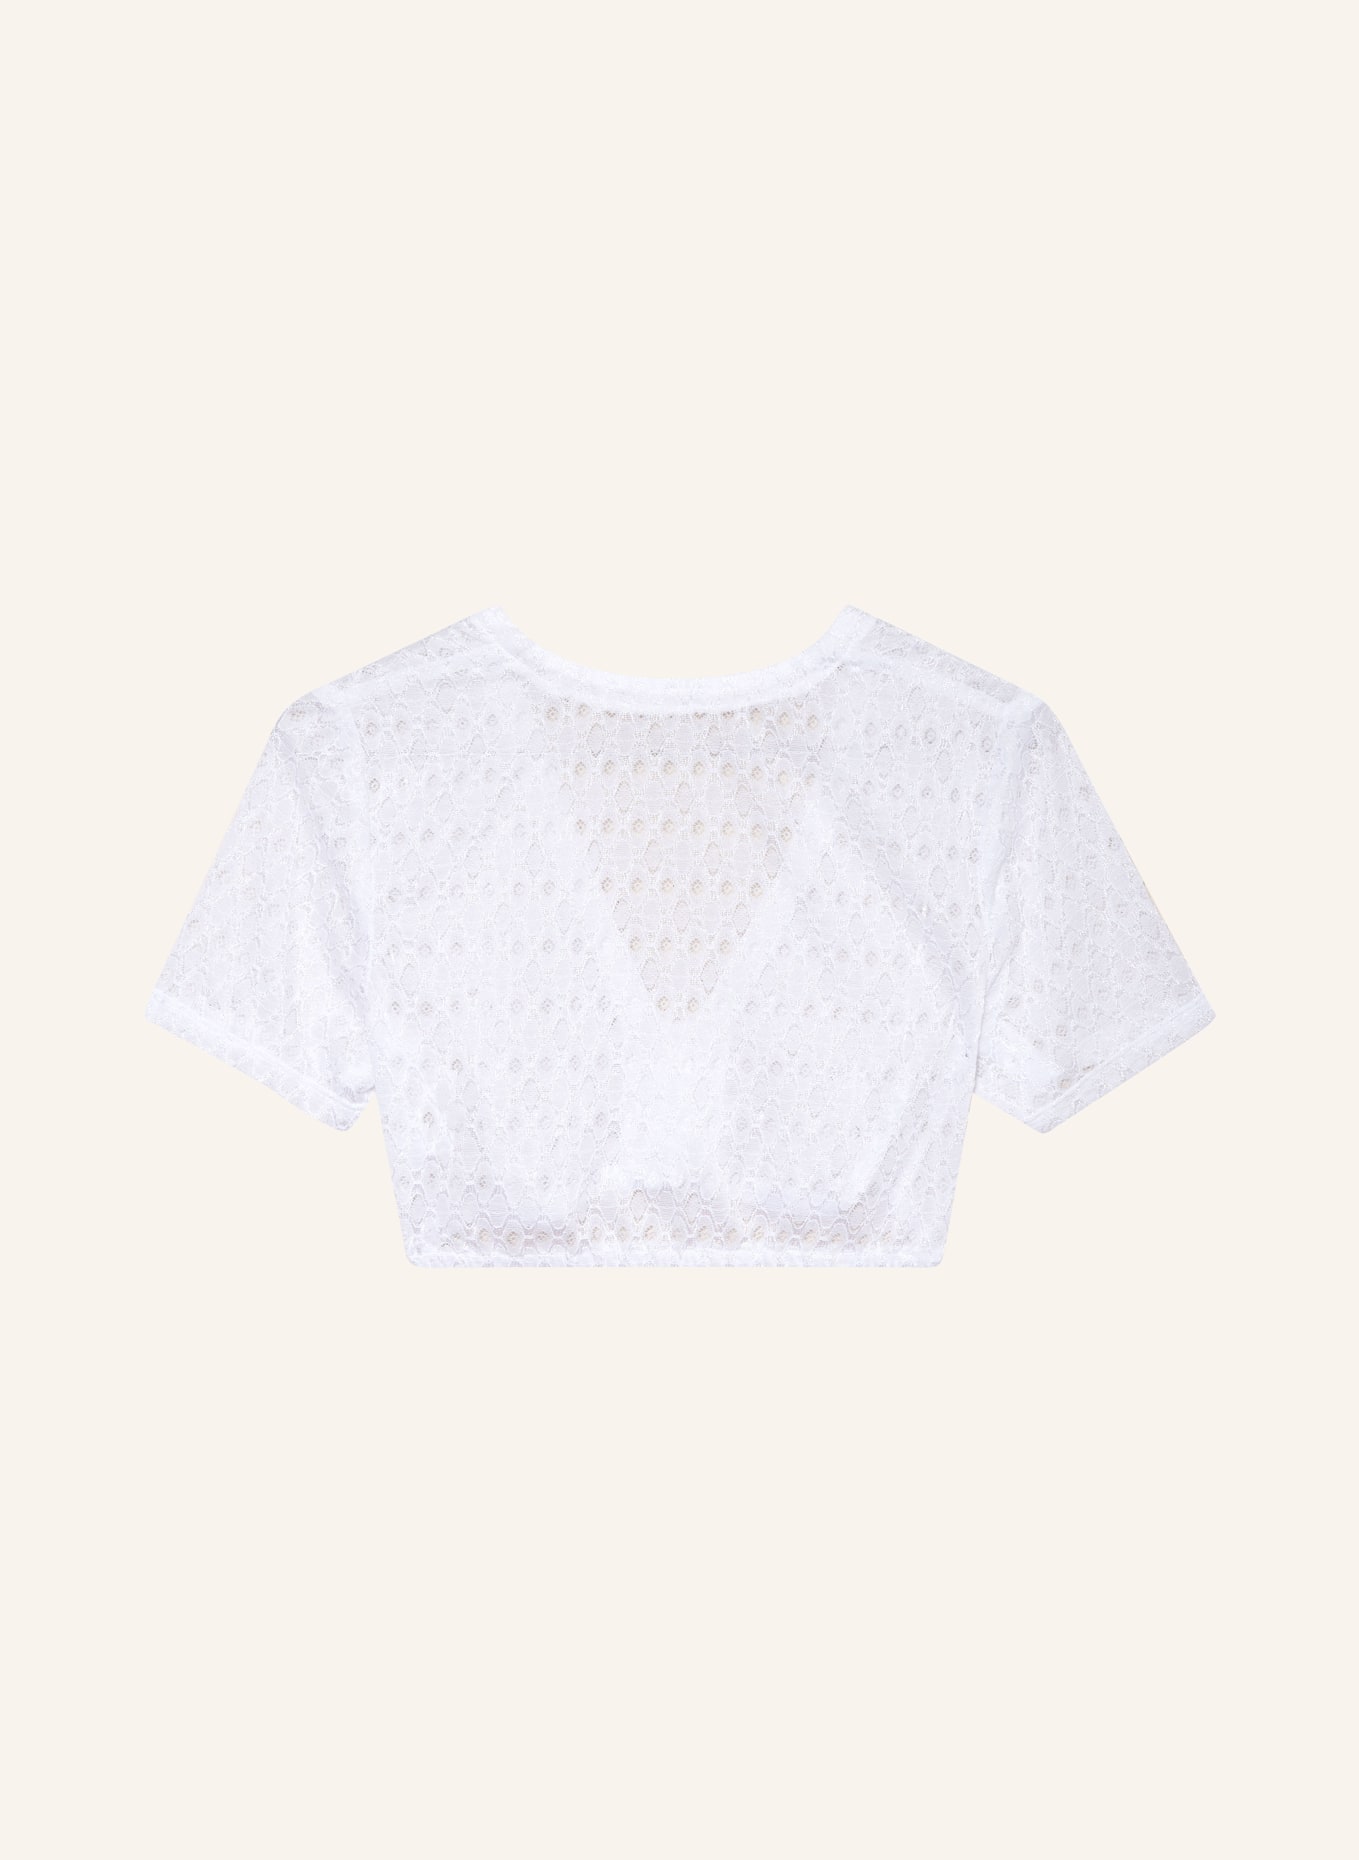 WALDORFF Dirndl blouse made of crochet lace, Color: WHITE (Image 2)